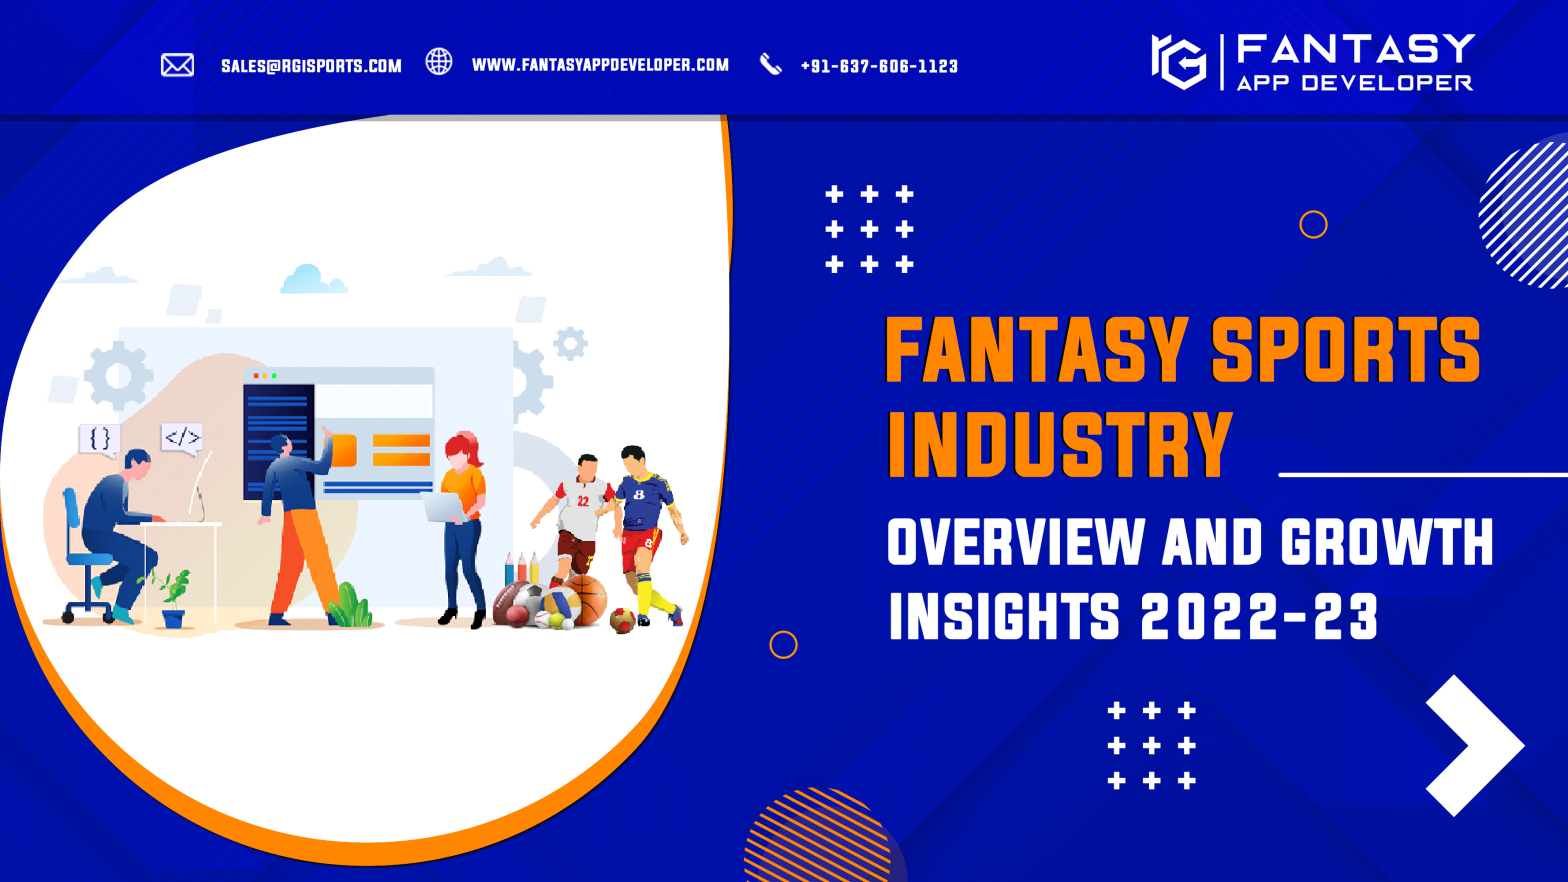 Fantasy Sports Industry Overview And Growth Insights 2022-23